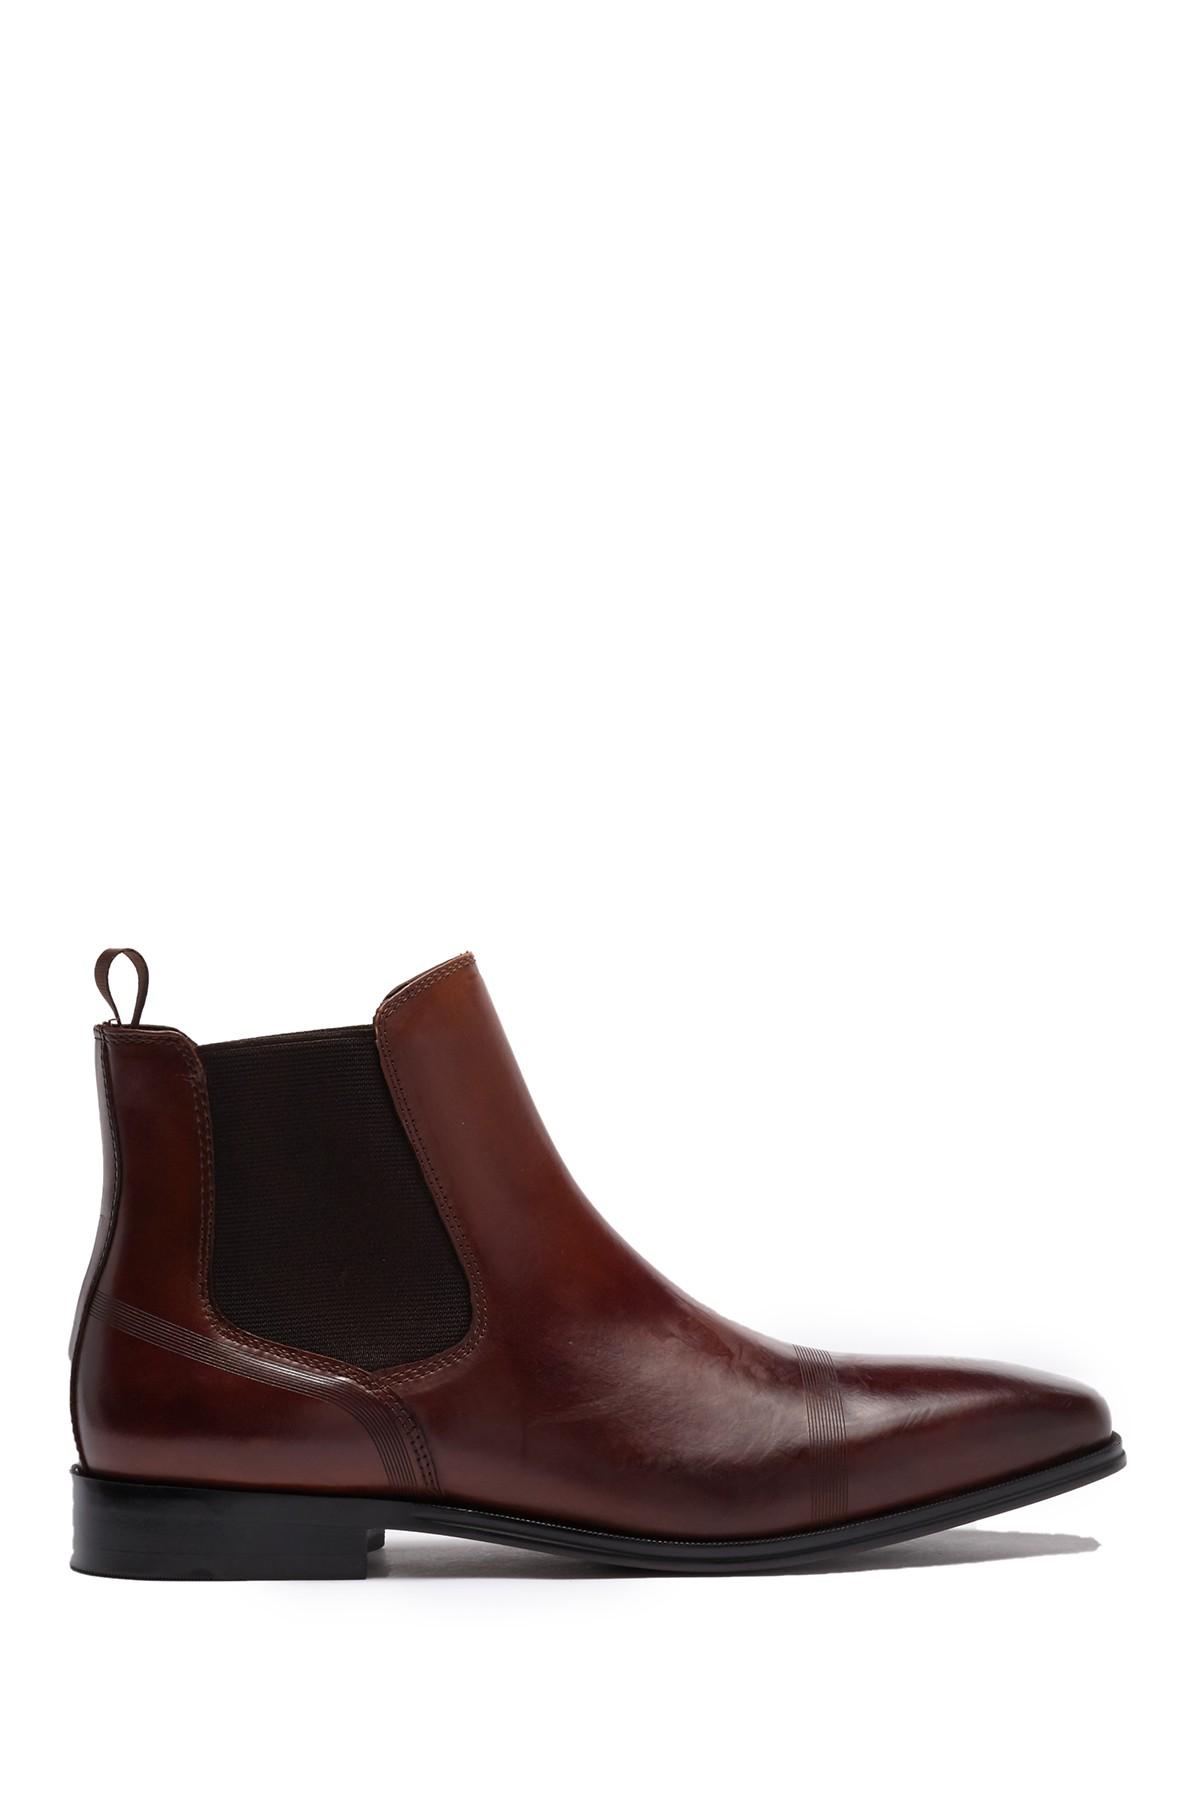 Kenneth Cole Reaction Leather Pure Chelsea Boot in Brown for Men - Lyst